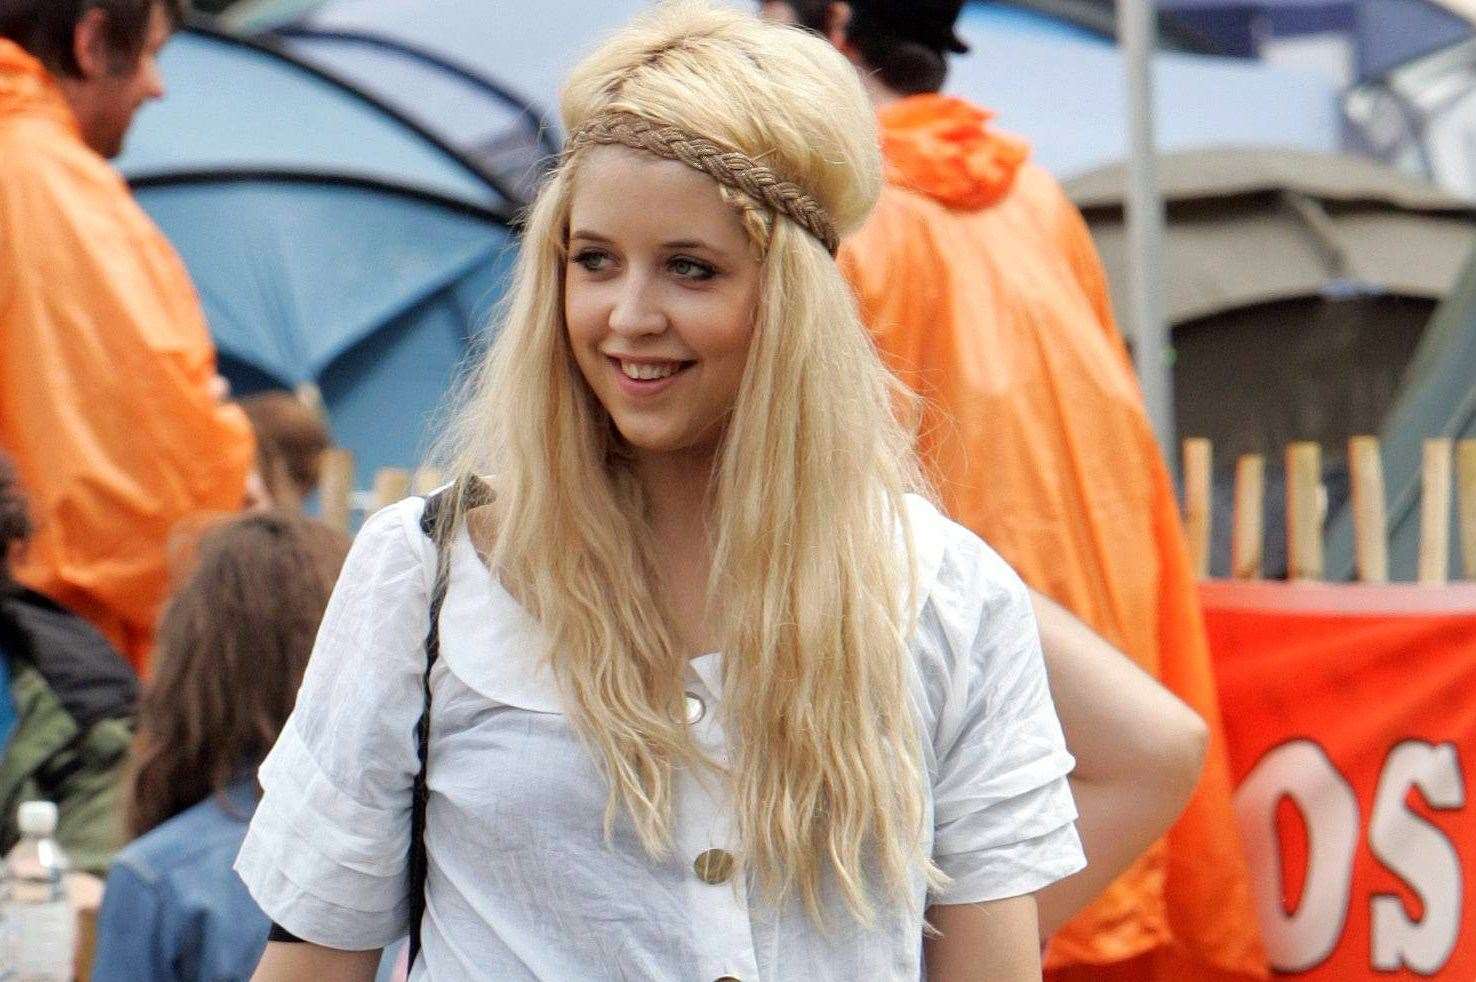 Peaches Geldof pictured backstage at Glastonbury in 2007. Picture: SWNS.com/Oli Scarff